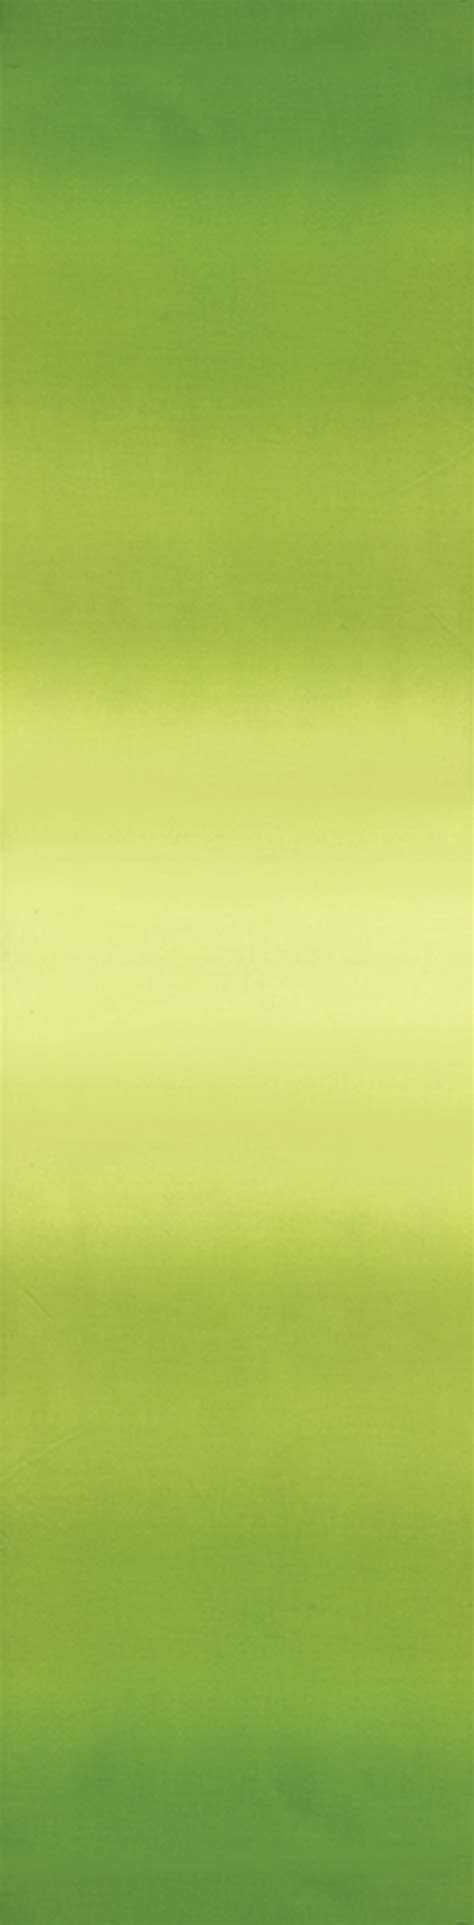 Ombre Lime Green 10800 18 752106989412